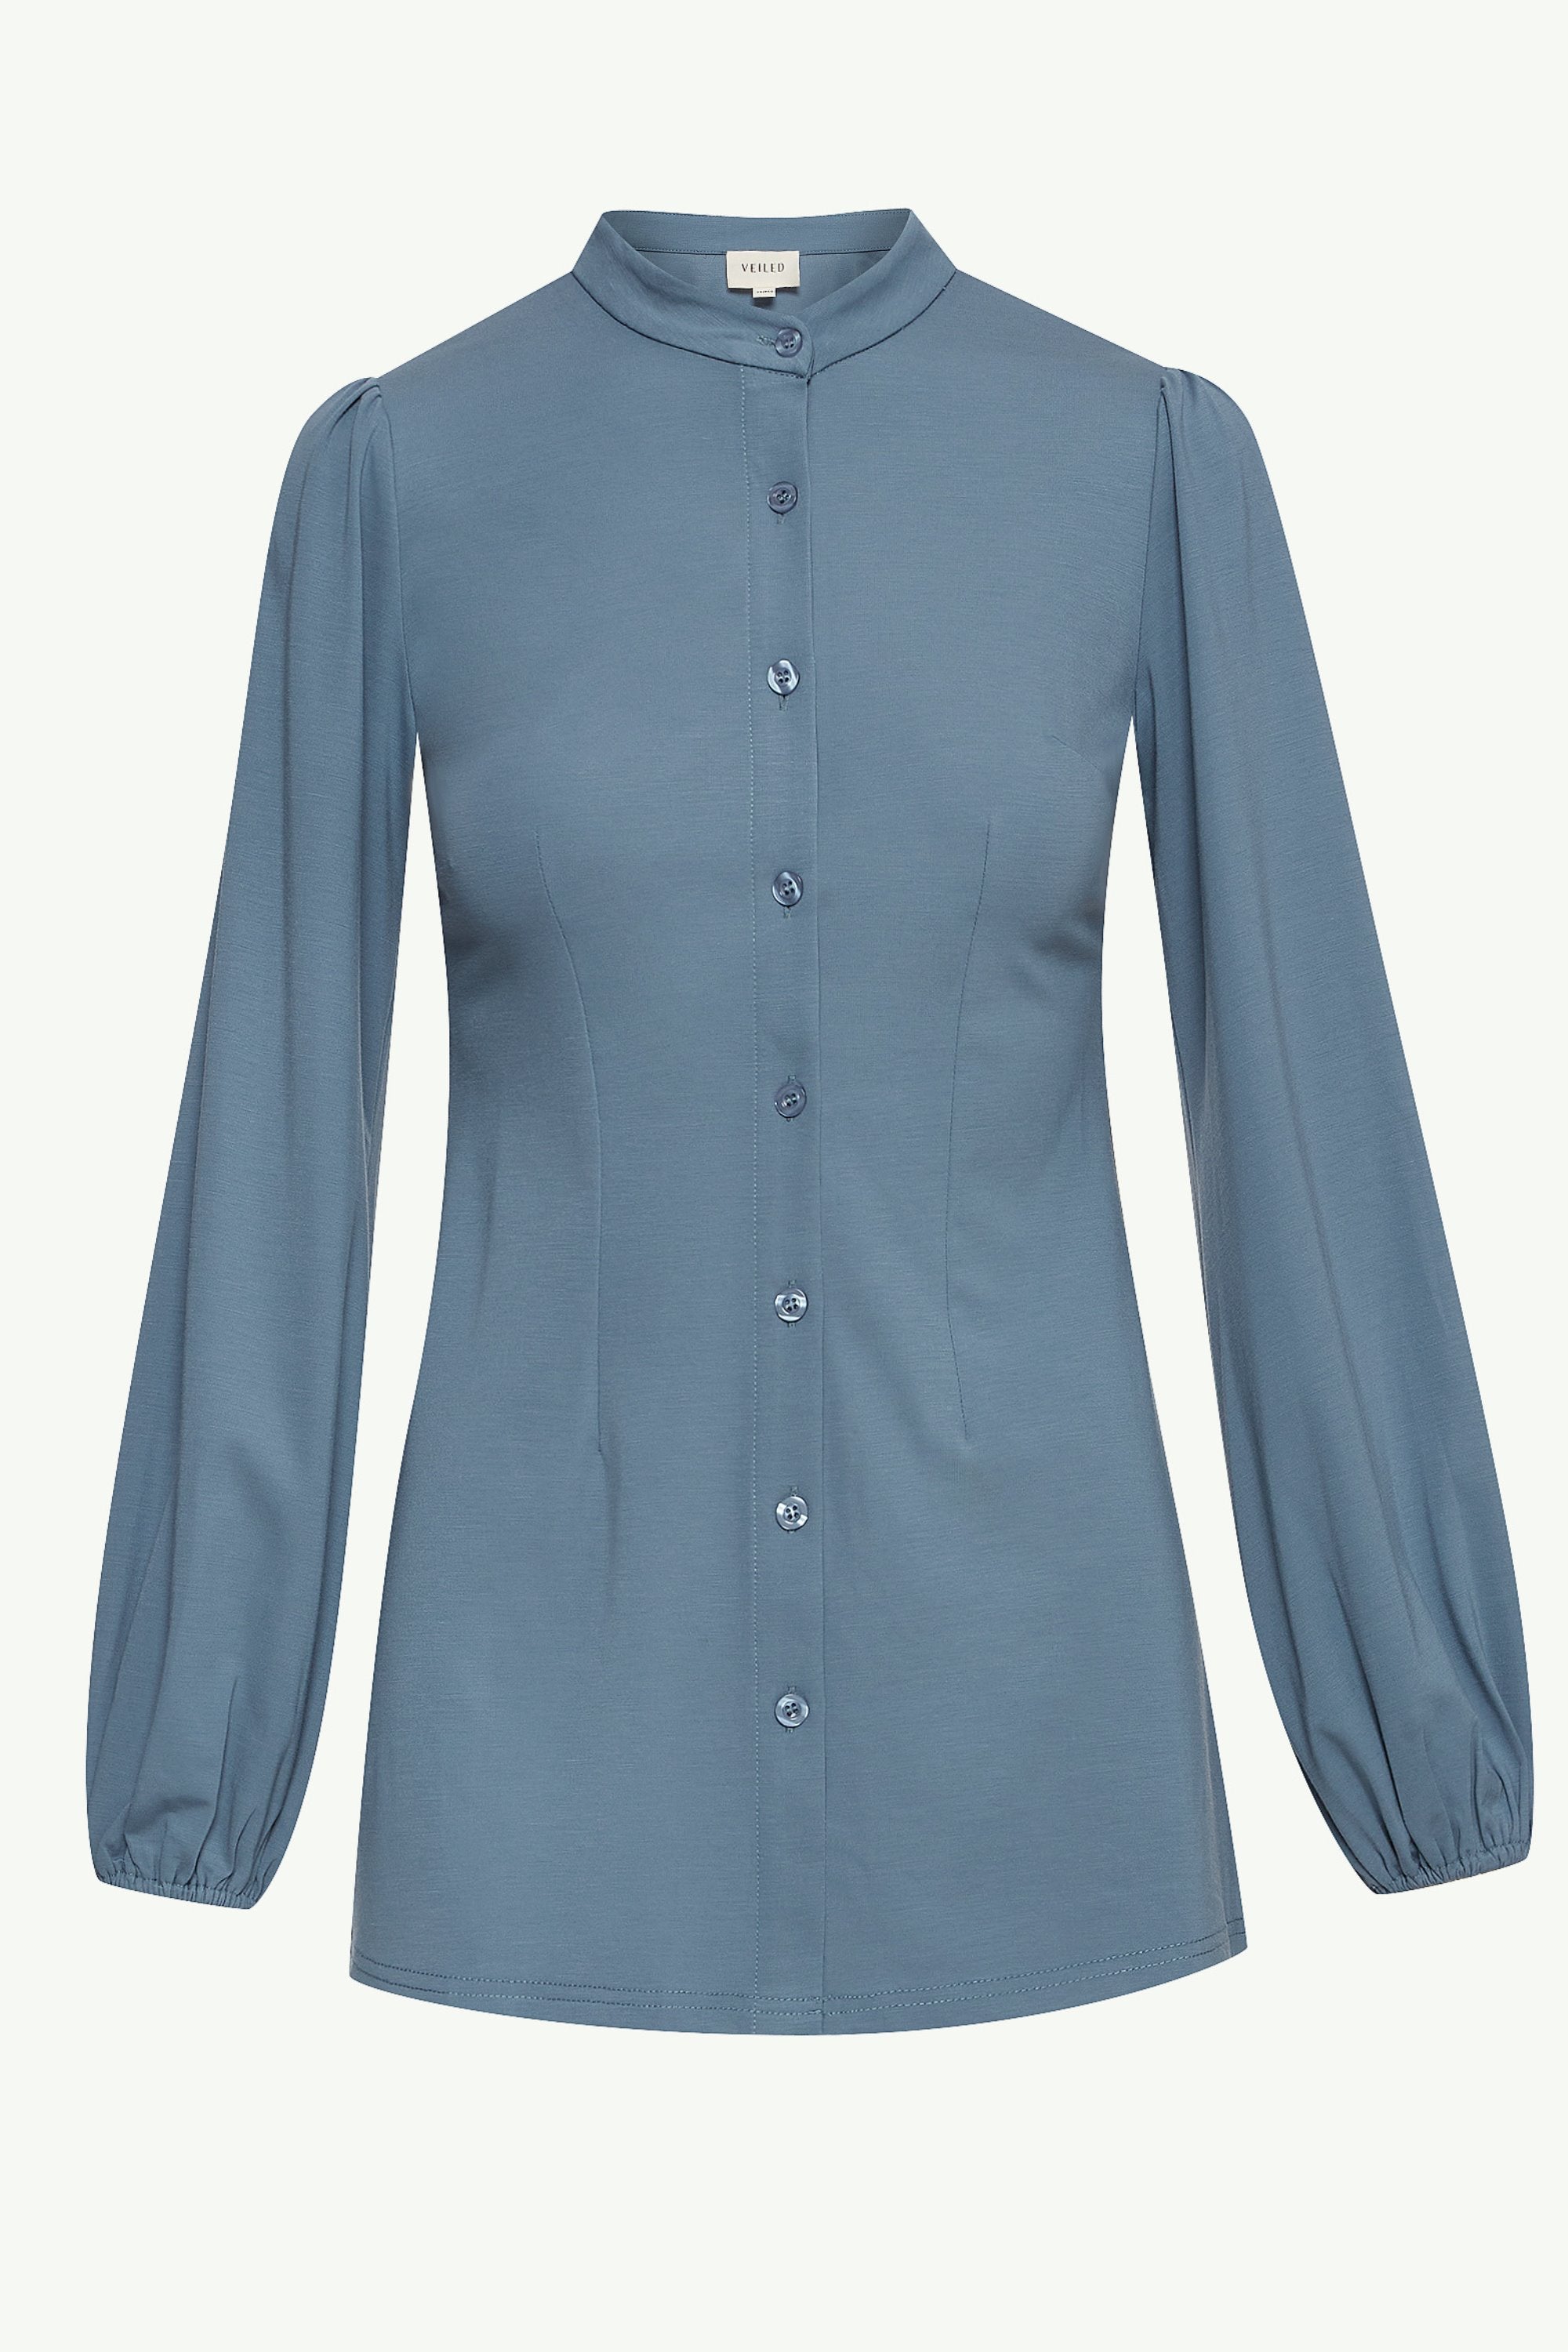 Rayana Jersey Button Down Top - Denim Blue Clothing epschoolboard 